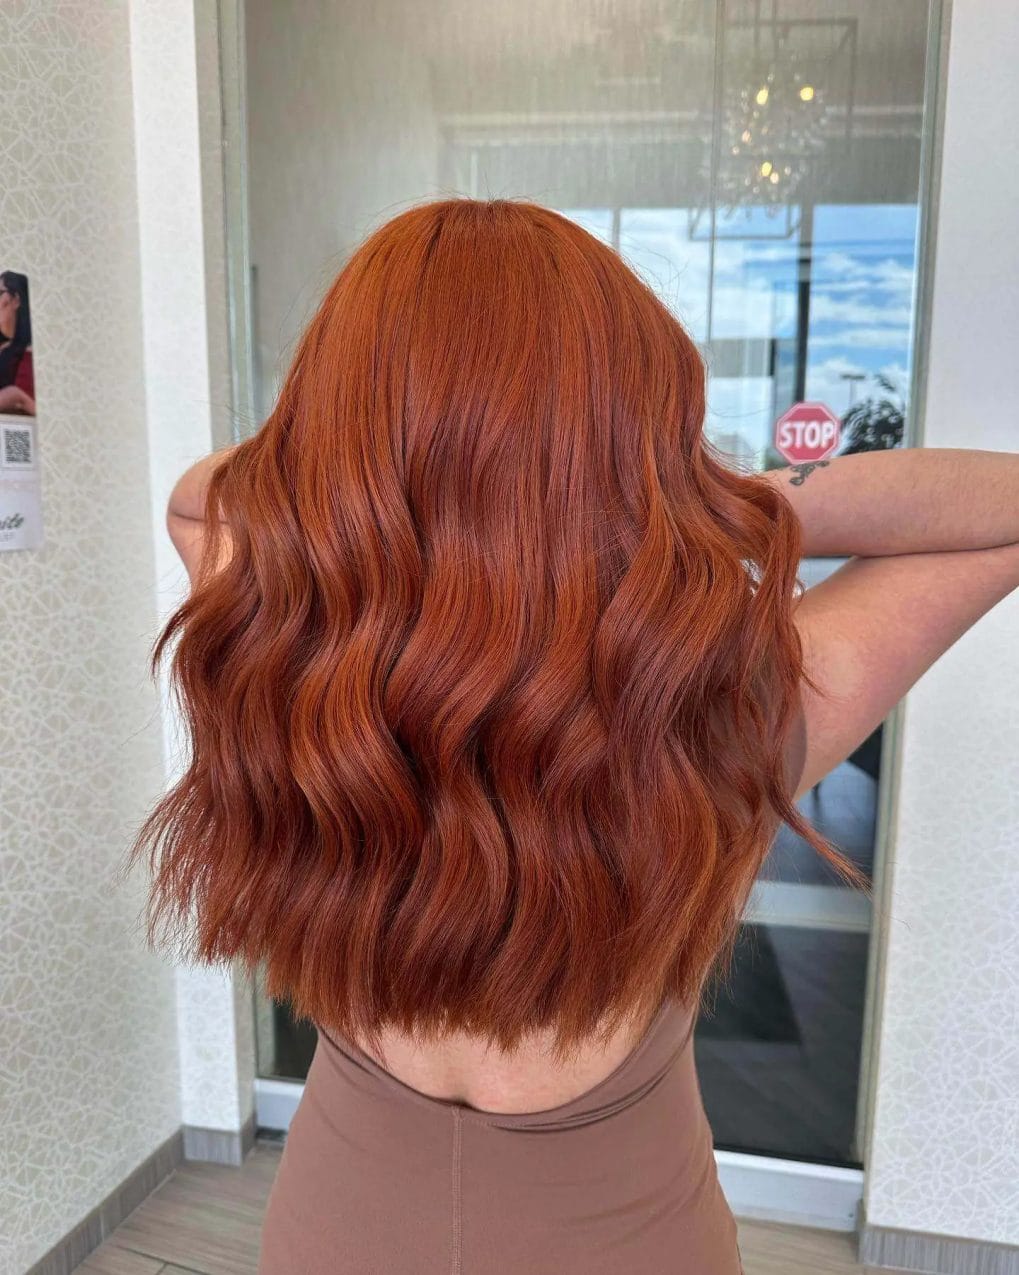 Mid-length, full-bodied copper hair with seamless layers and soft waves.